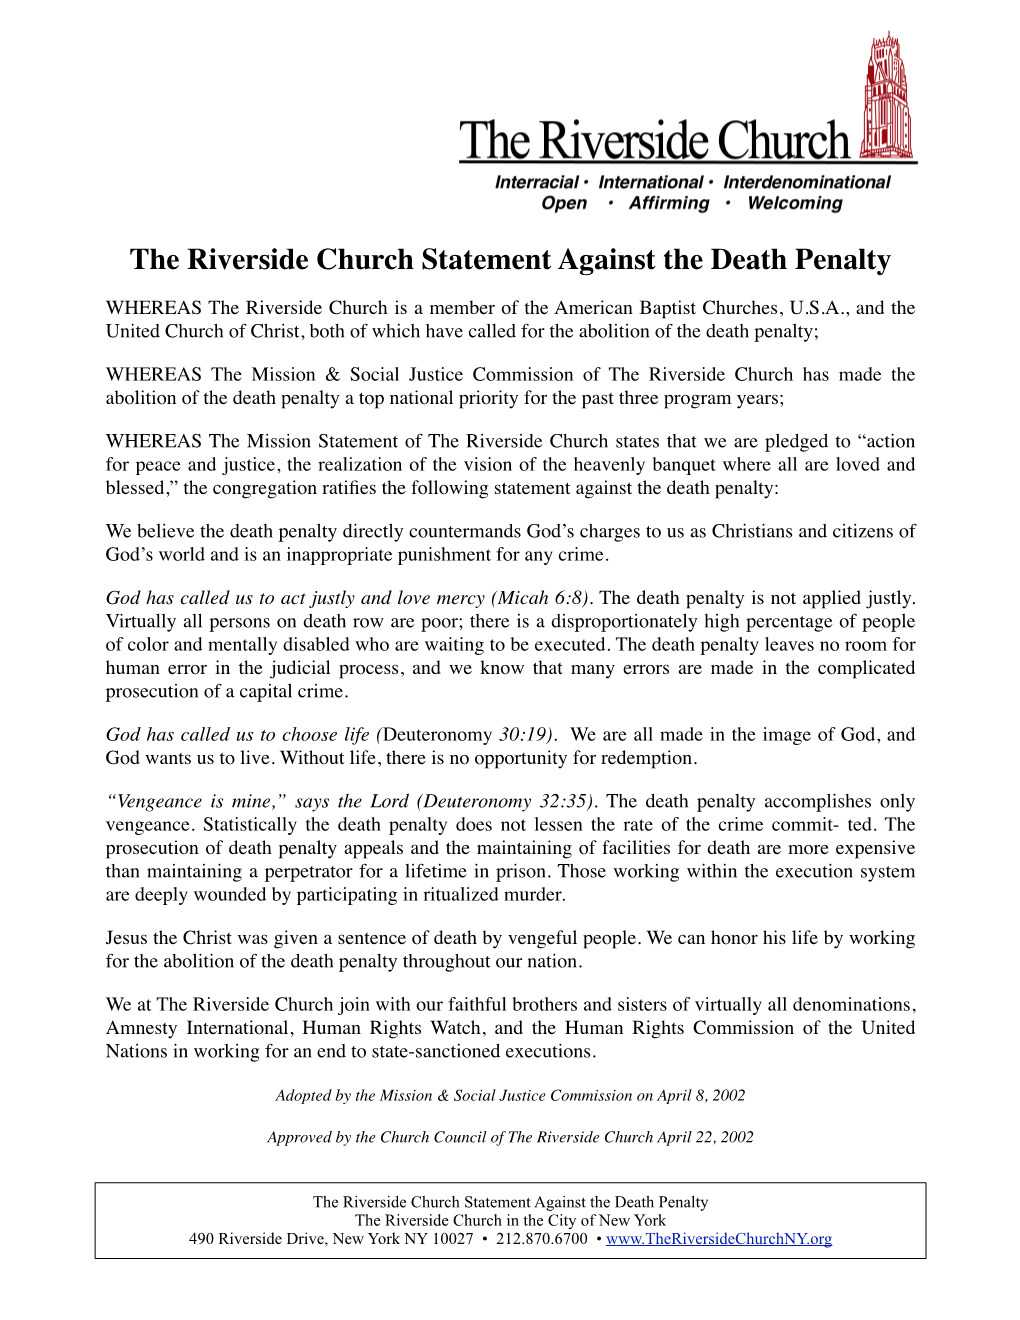 The Riverside Church Statement Against the Death Penalty